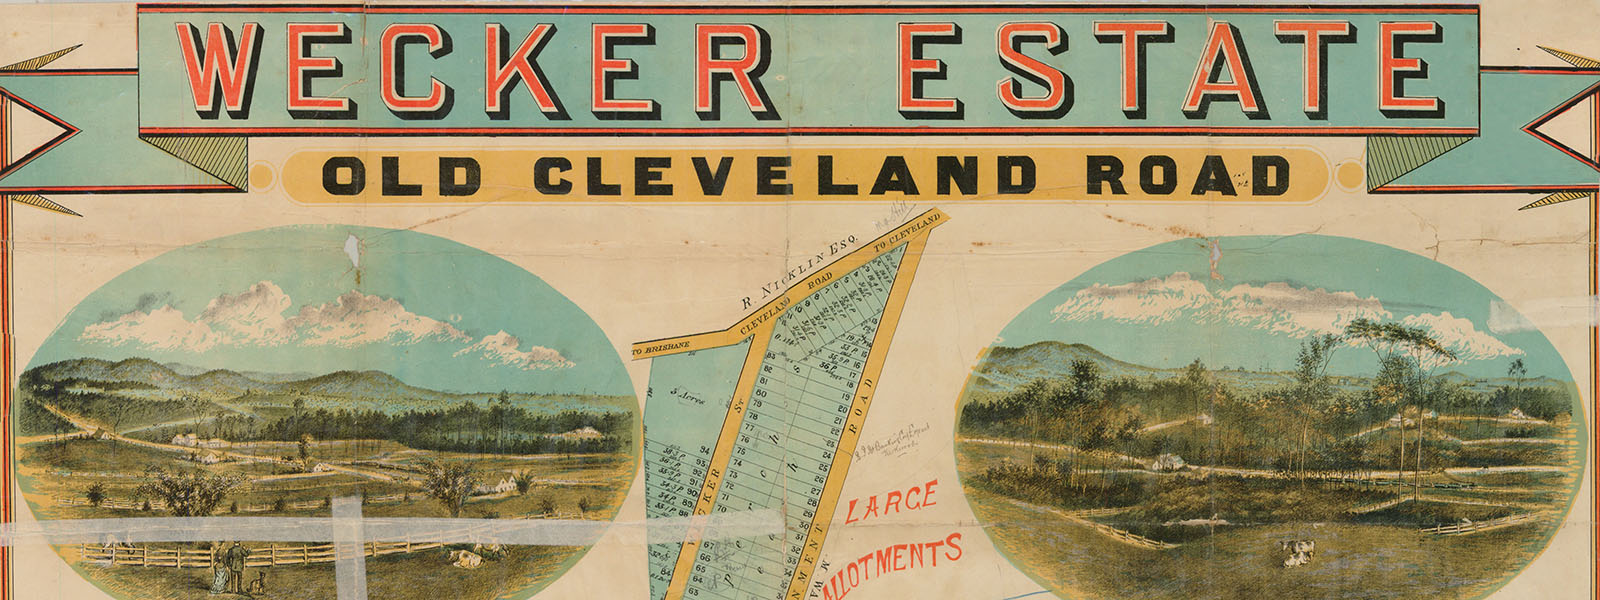 Historic poster of Wecker Estate, Old Cleveland Road